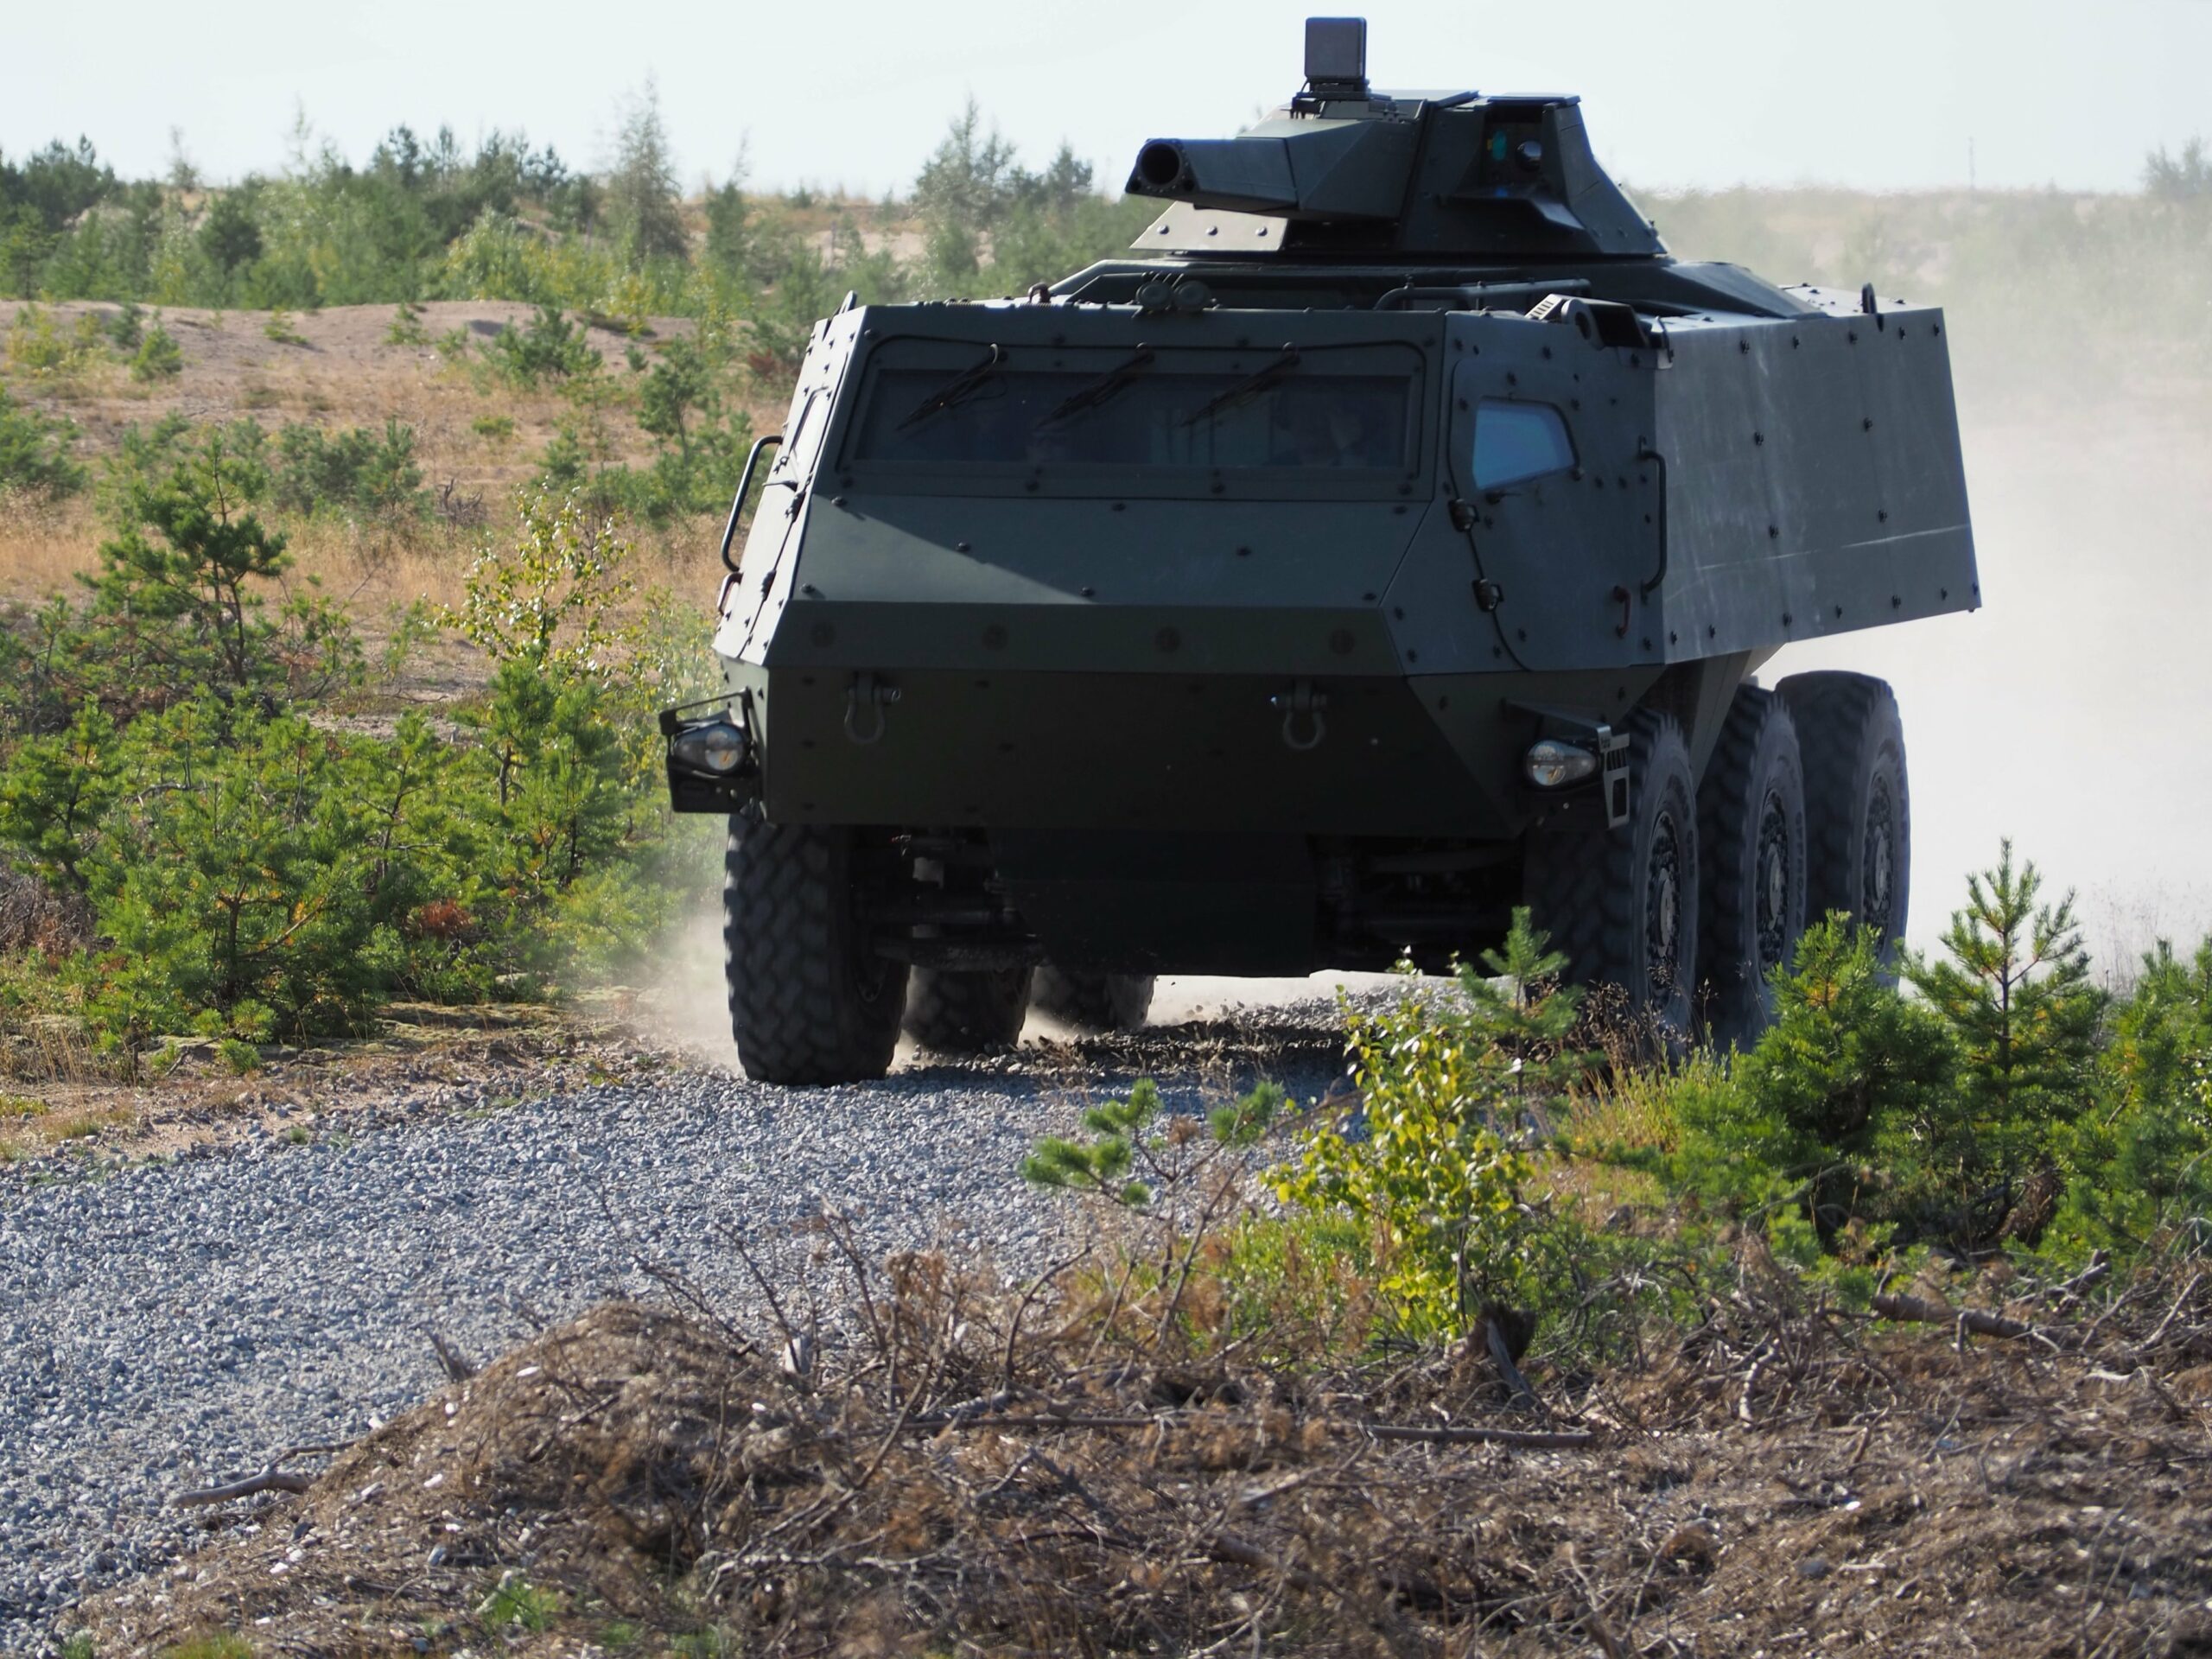 Patria 6x6 armored personnel carrier